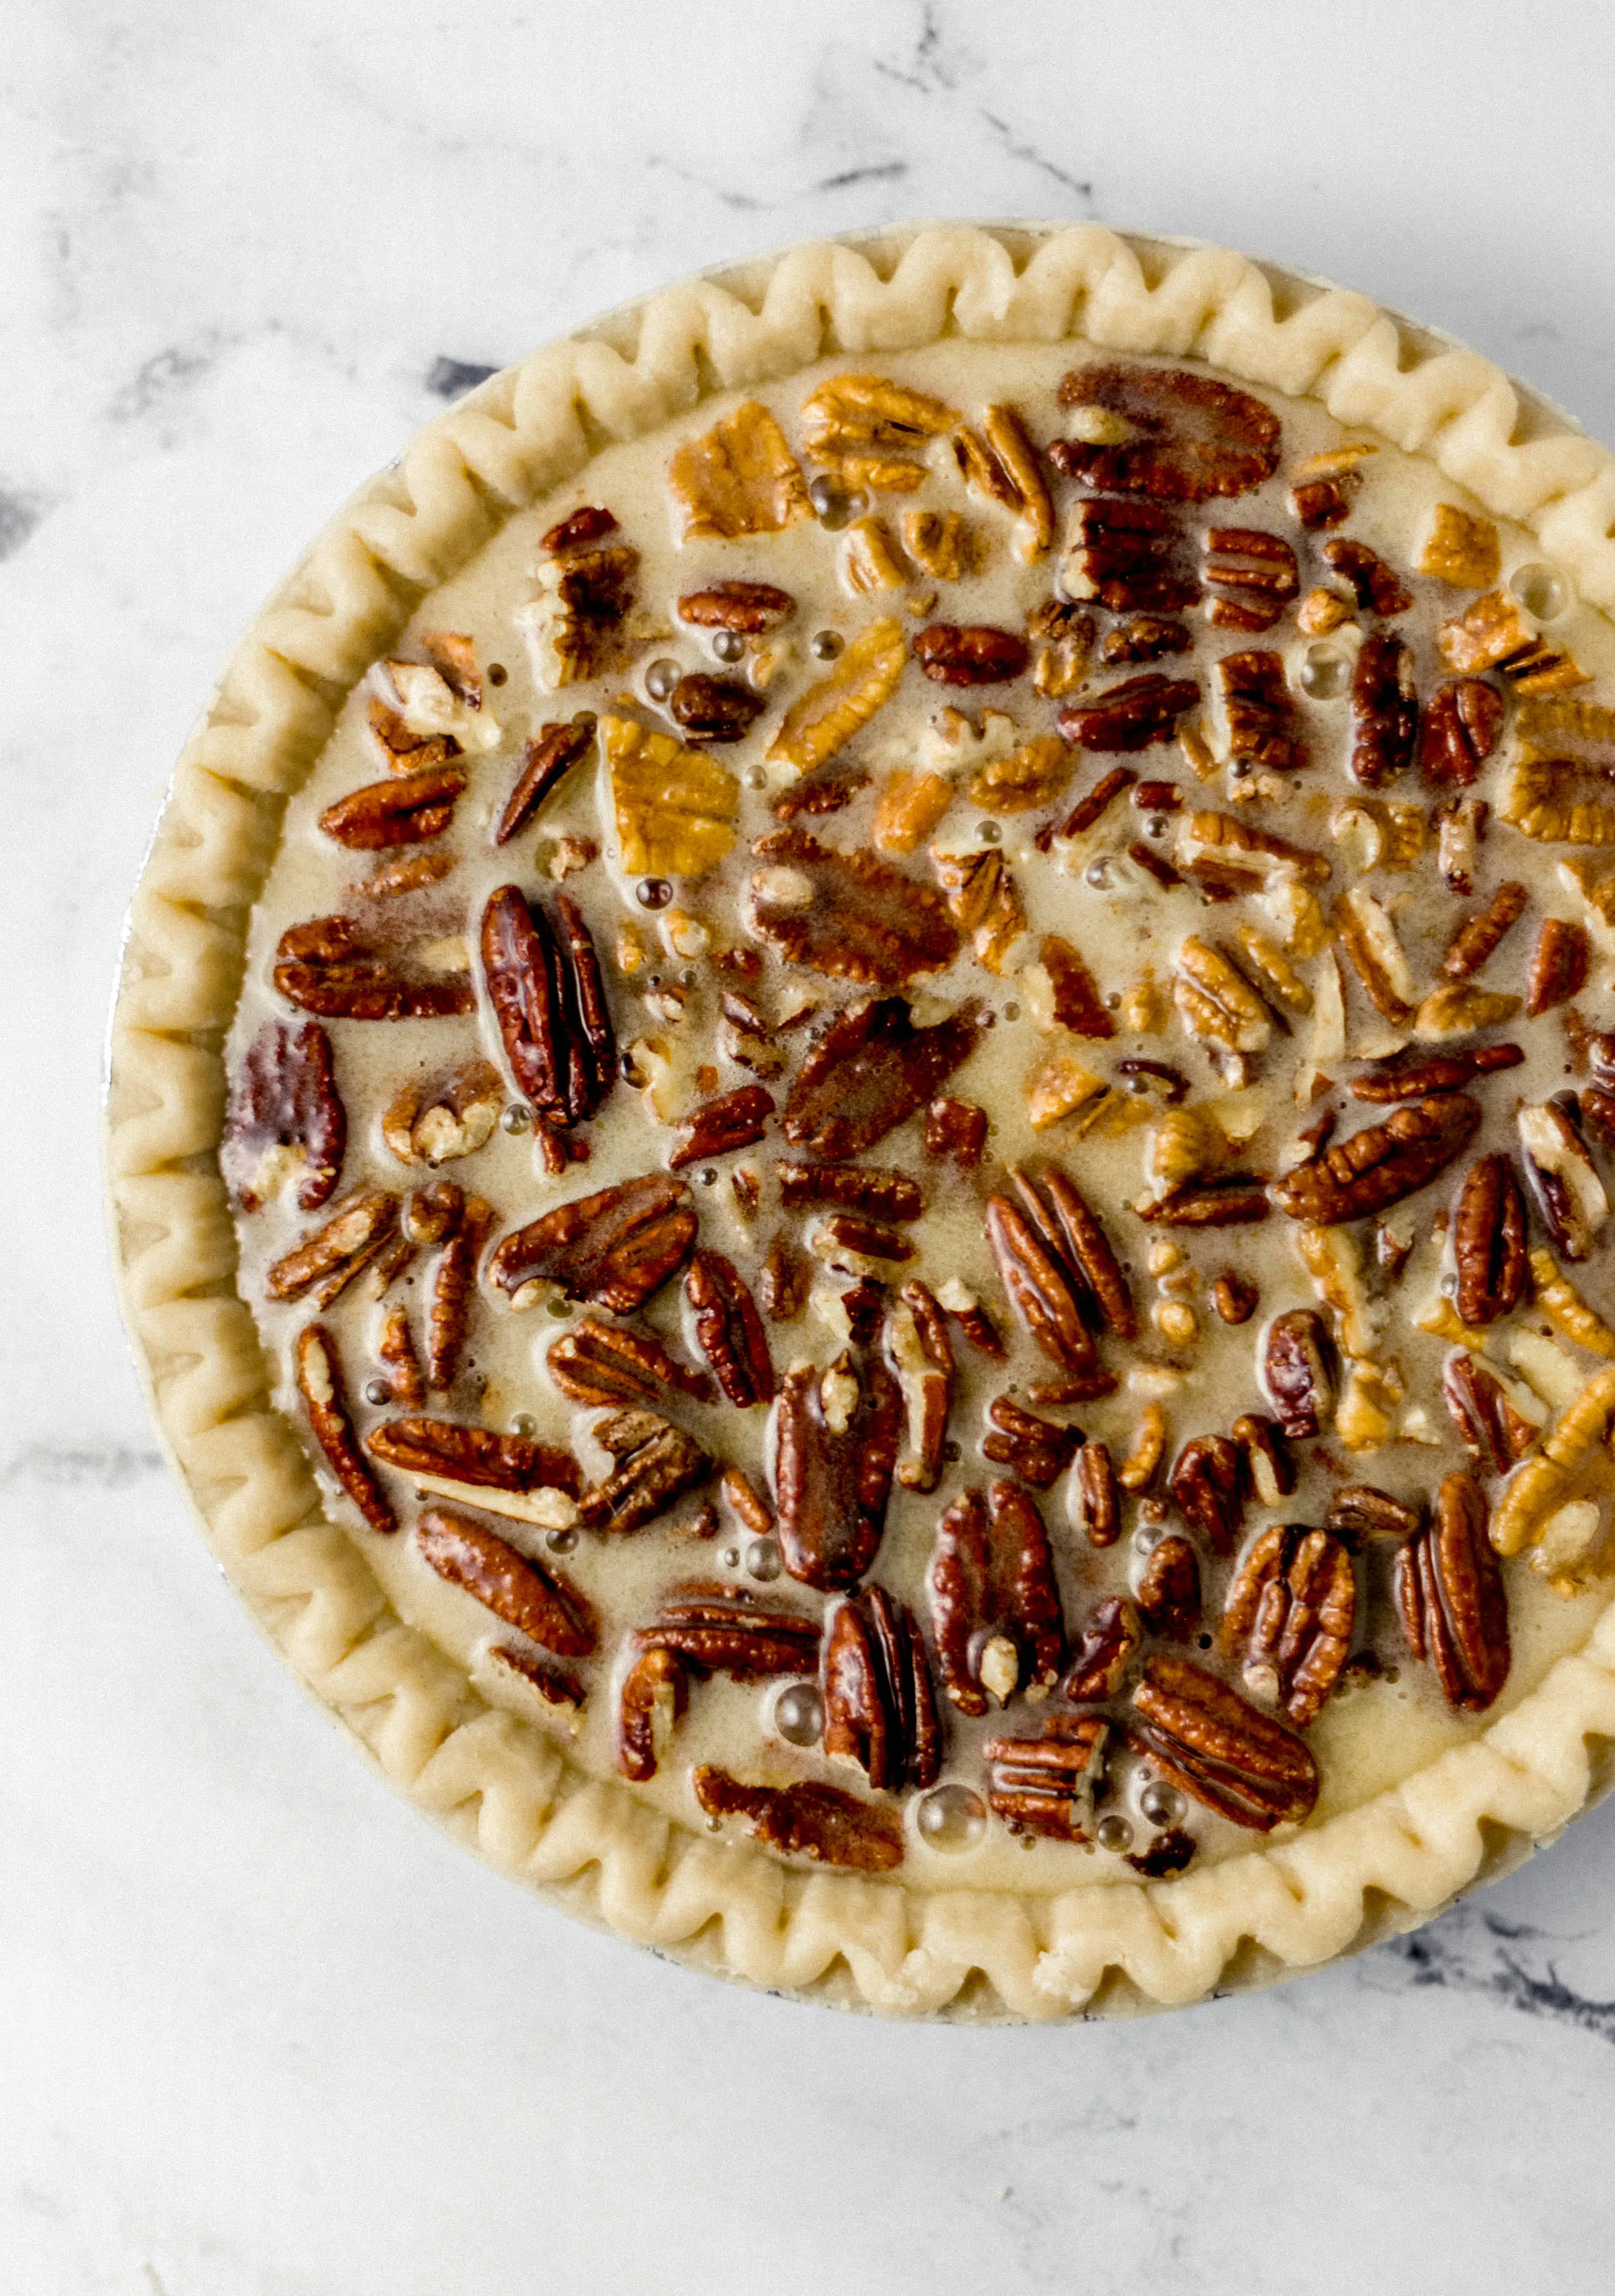 filling poured into pie crust with pecans 